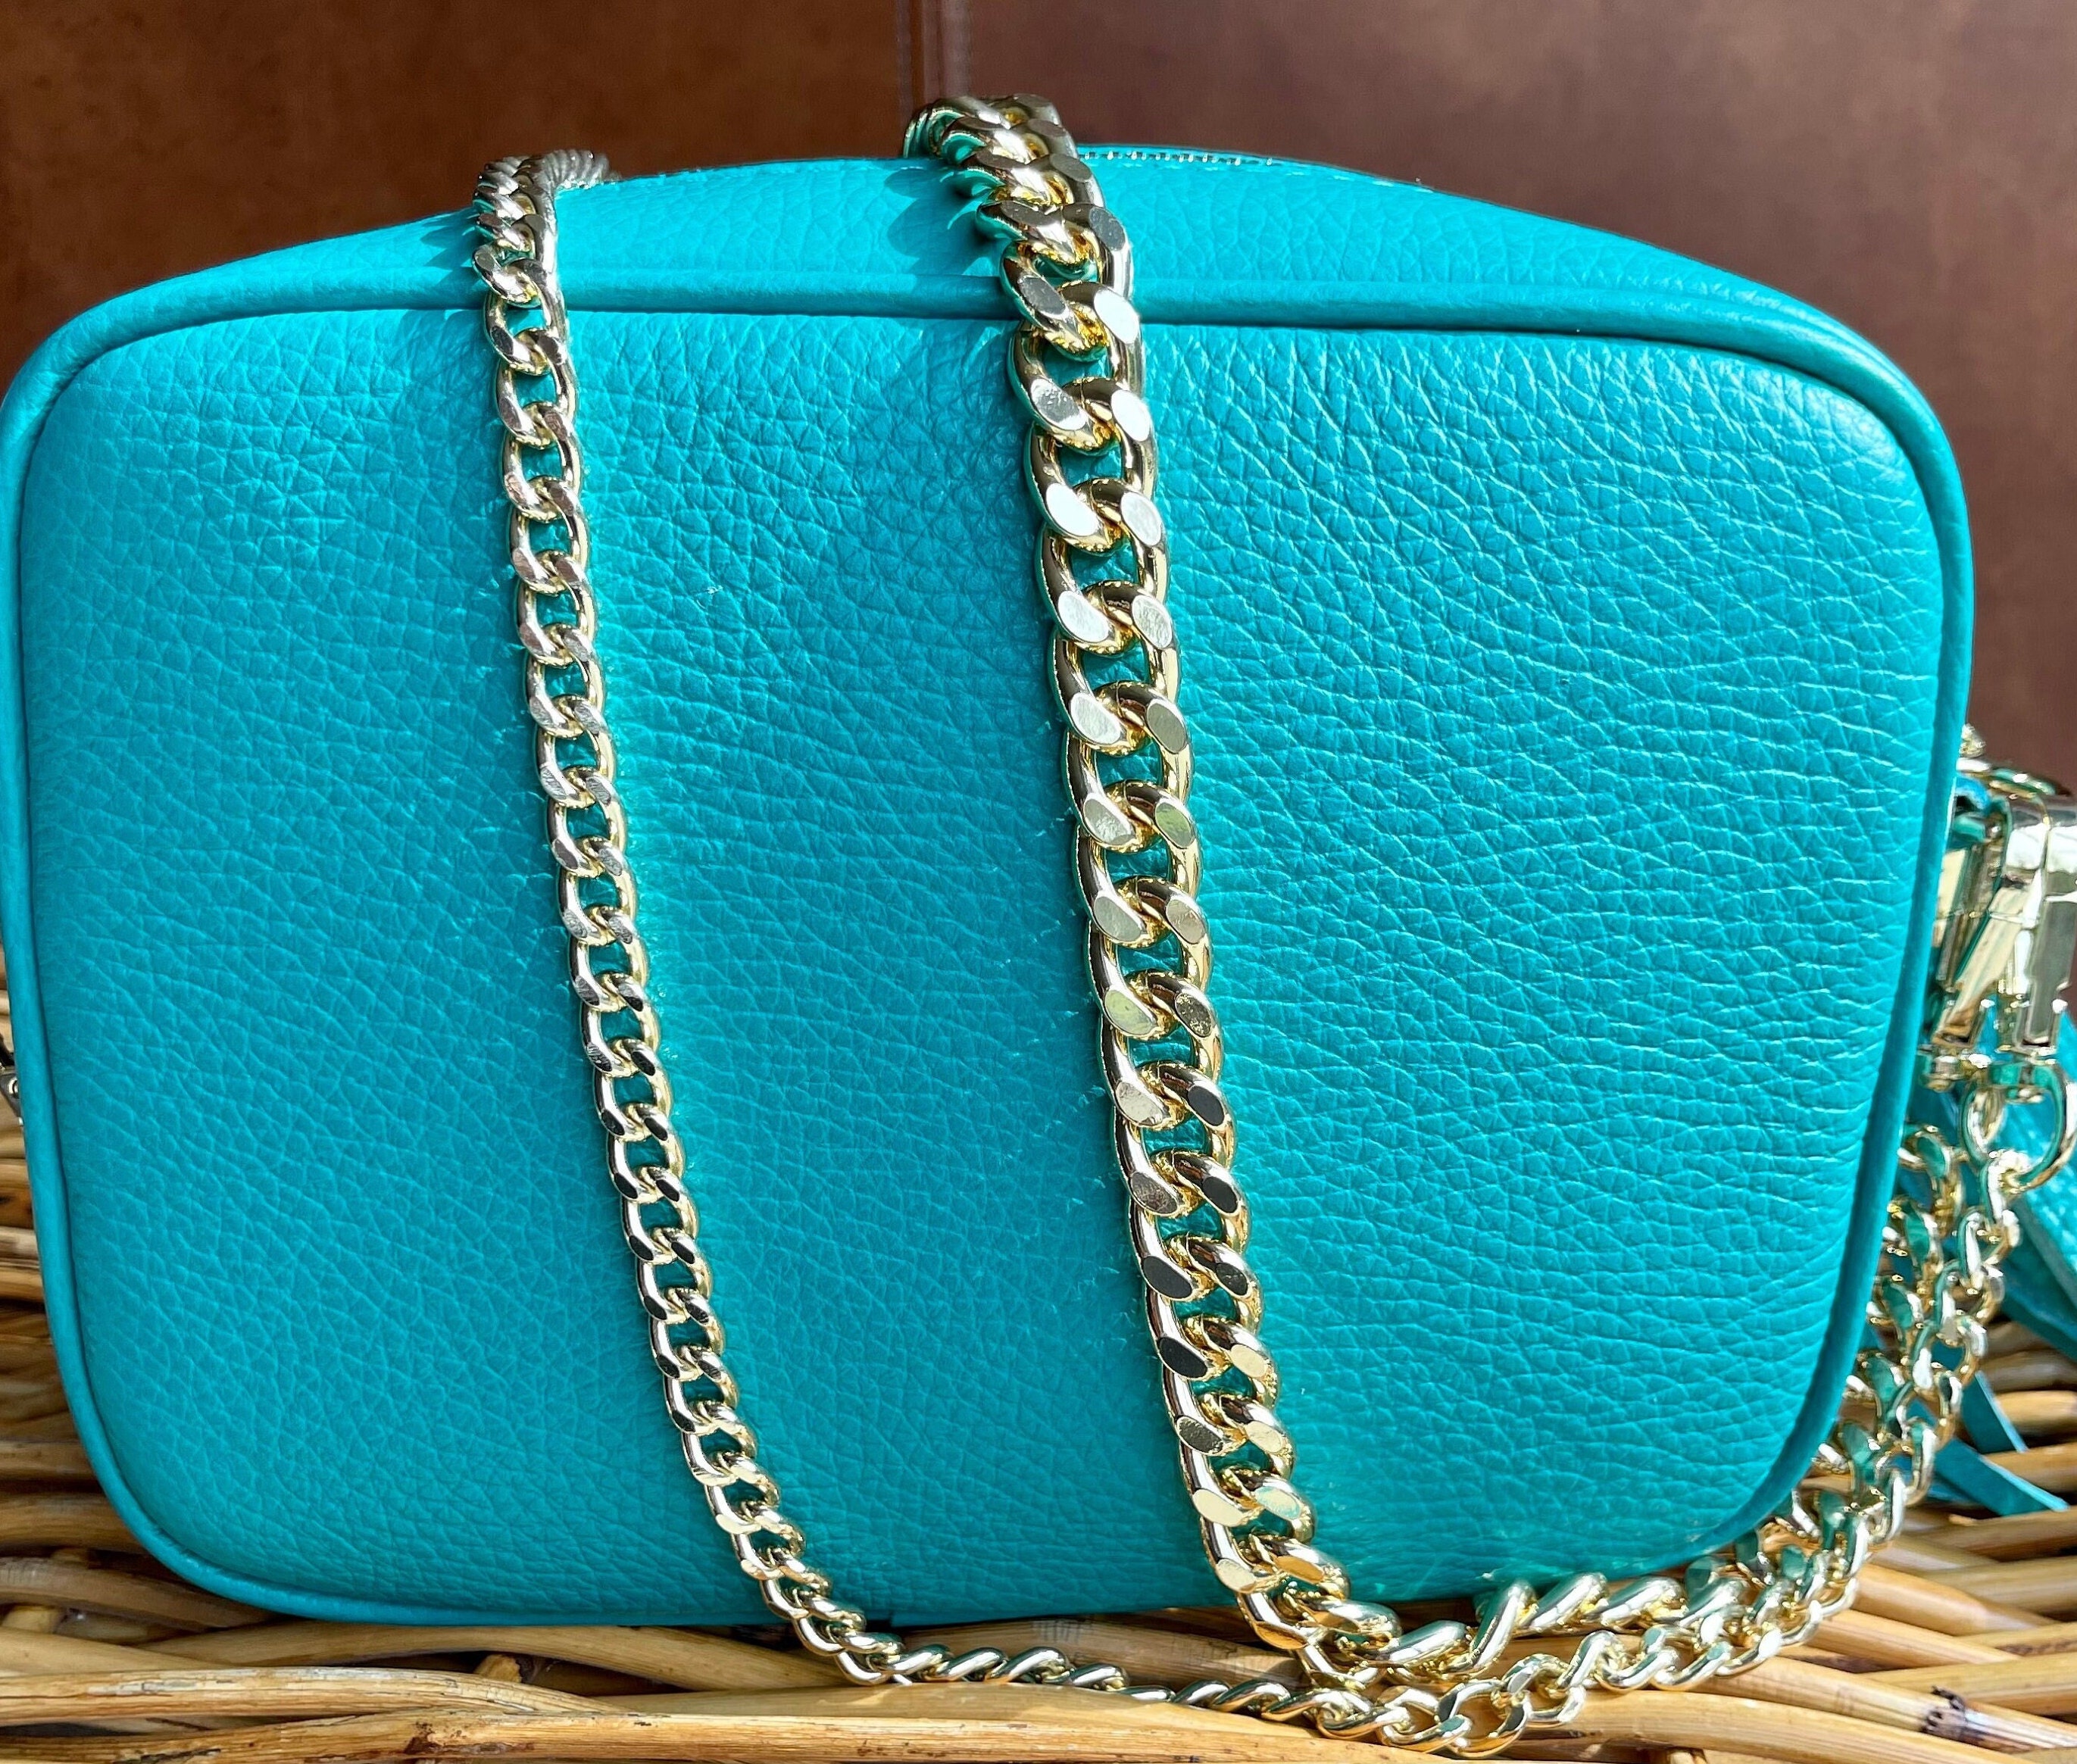 Gold Purse chain/Turquoise Purse Handle/Gold Crossbody Chain and Handle /luxury Bag straps/Turquoise Bag Handle/Strap Set